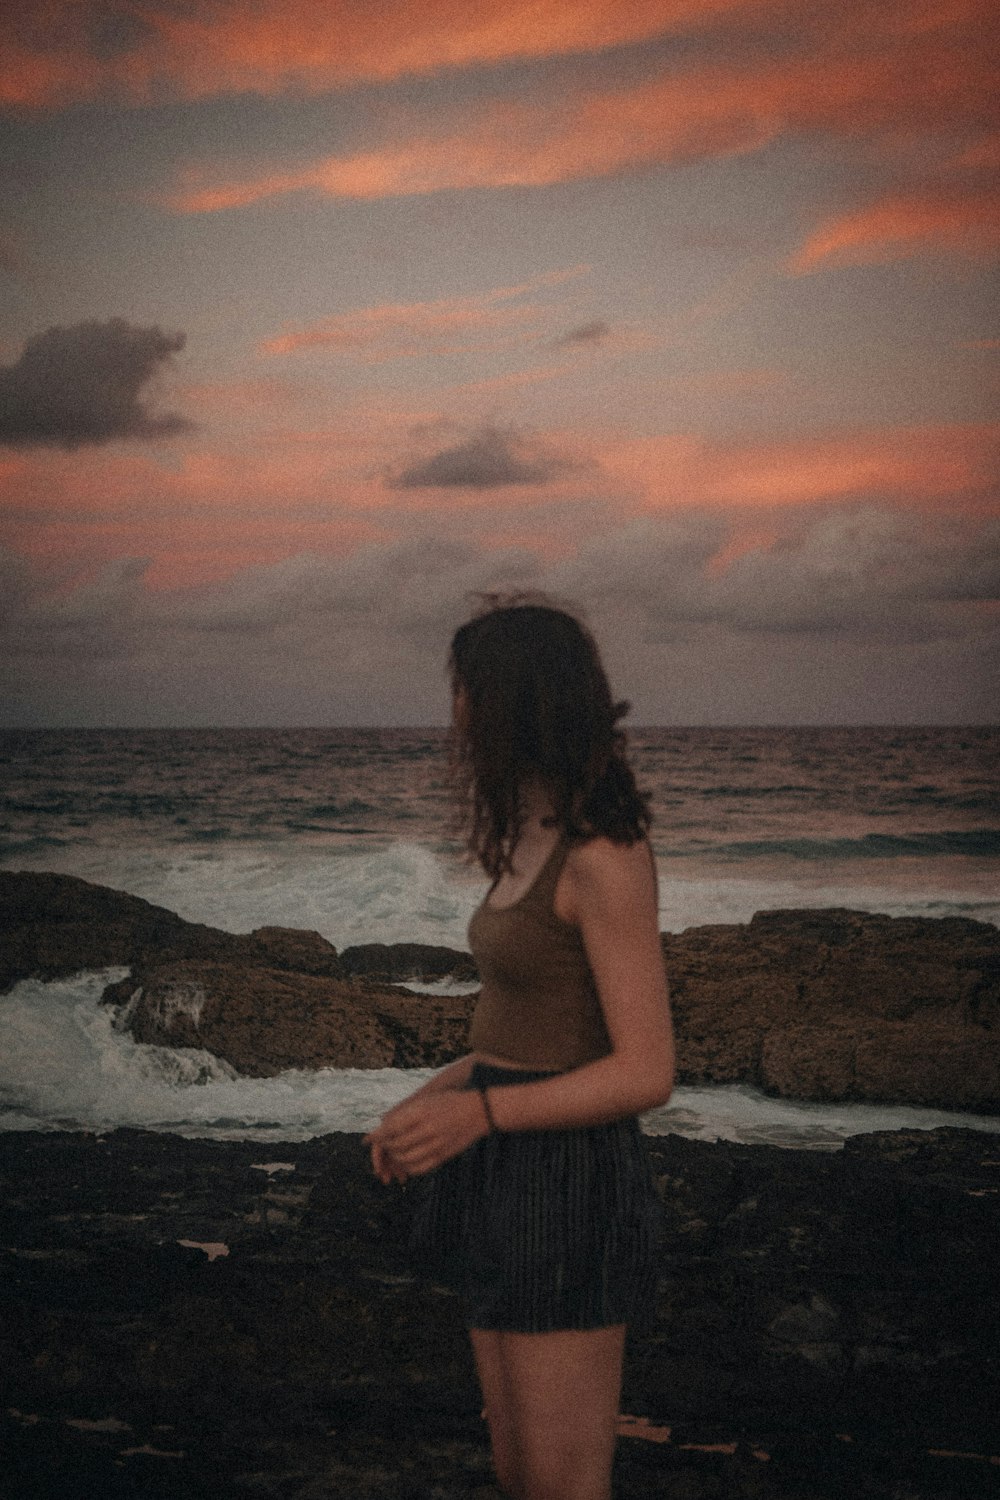 woman in gray dress standing on rock formation near sea during sunset